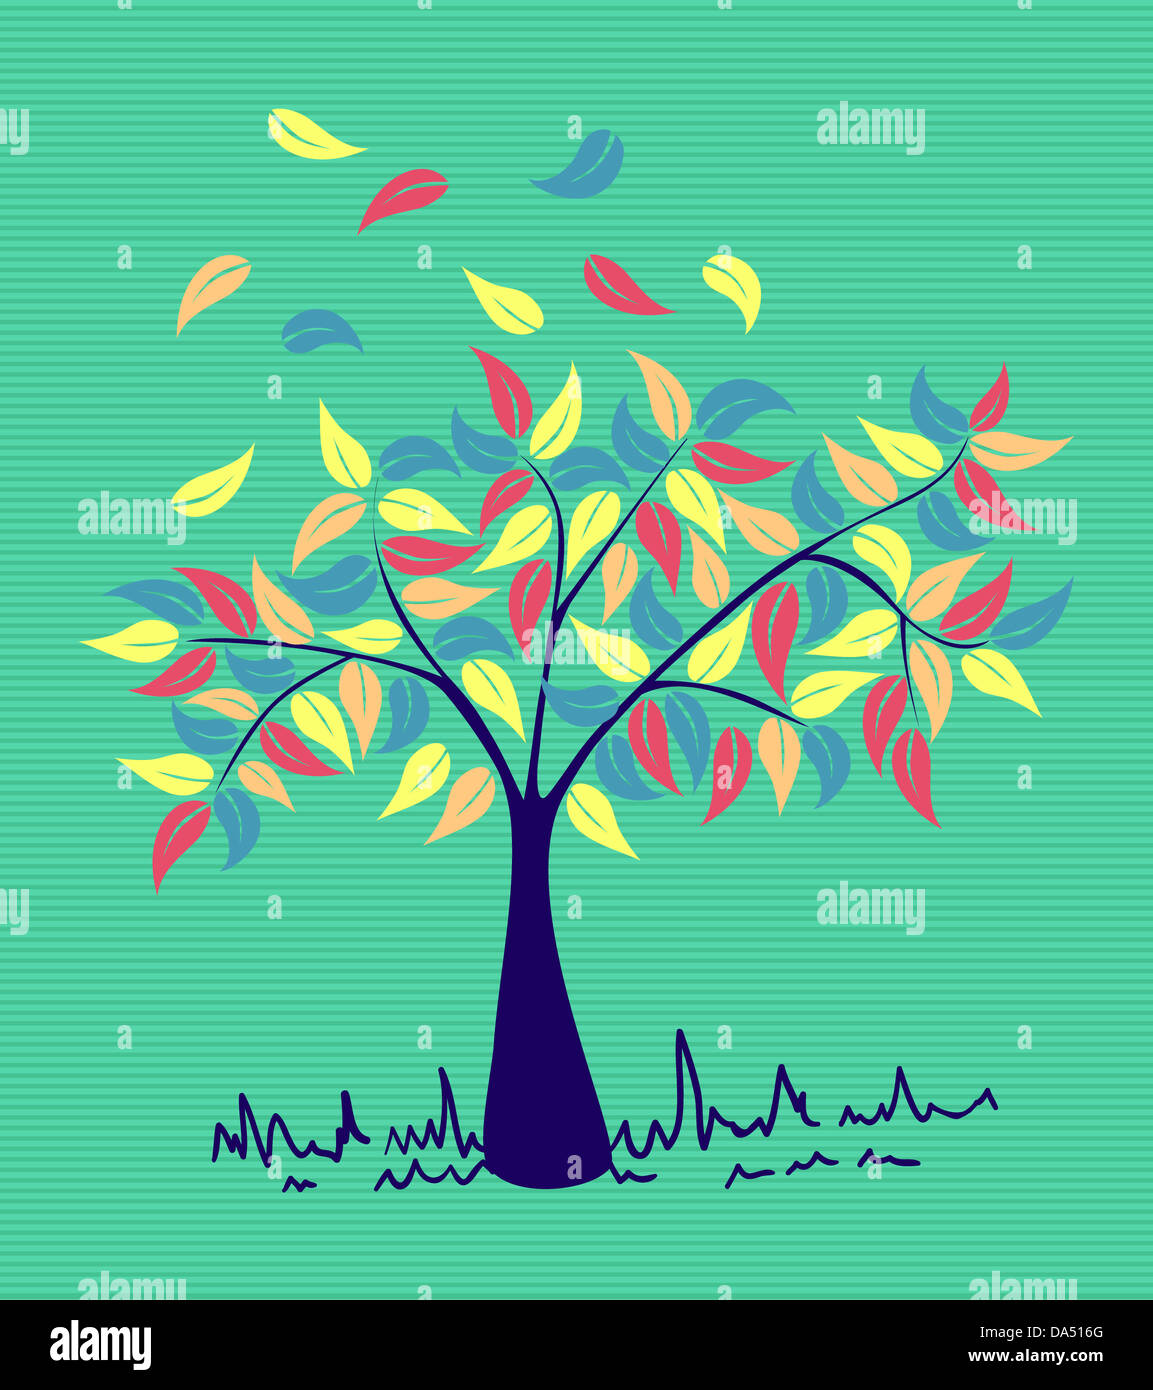 Colorful branches leaf tree with stripes background design. Vector file layered for easy manipulation and custom coloring. Stock Photo